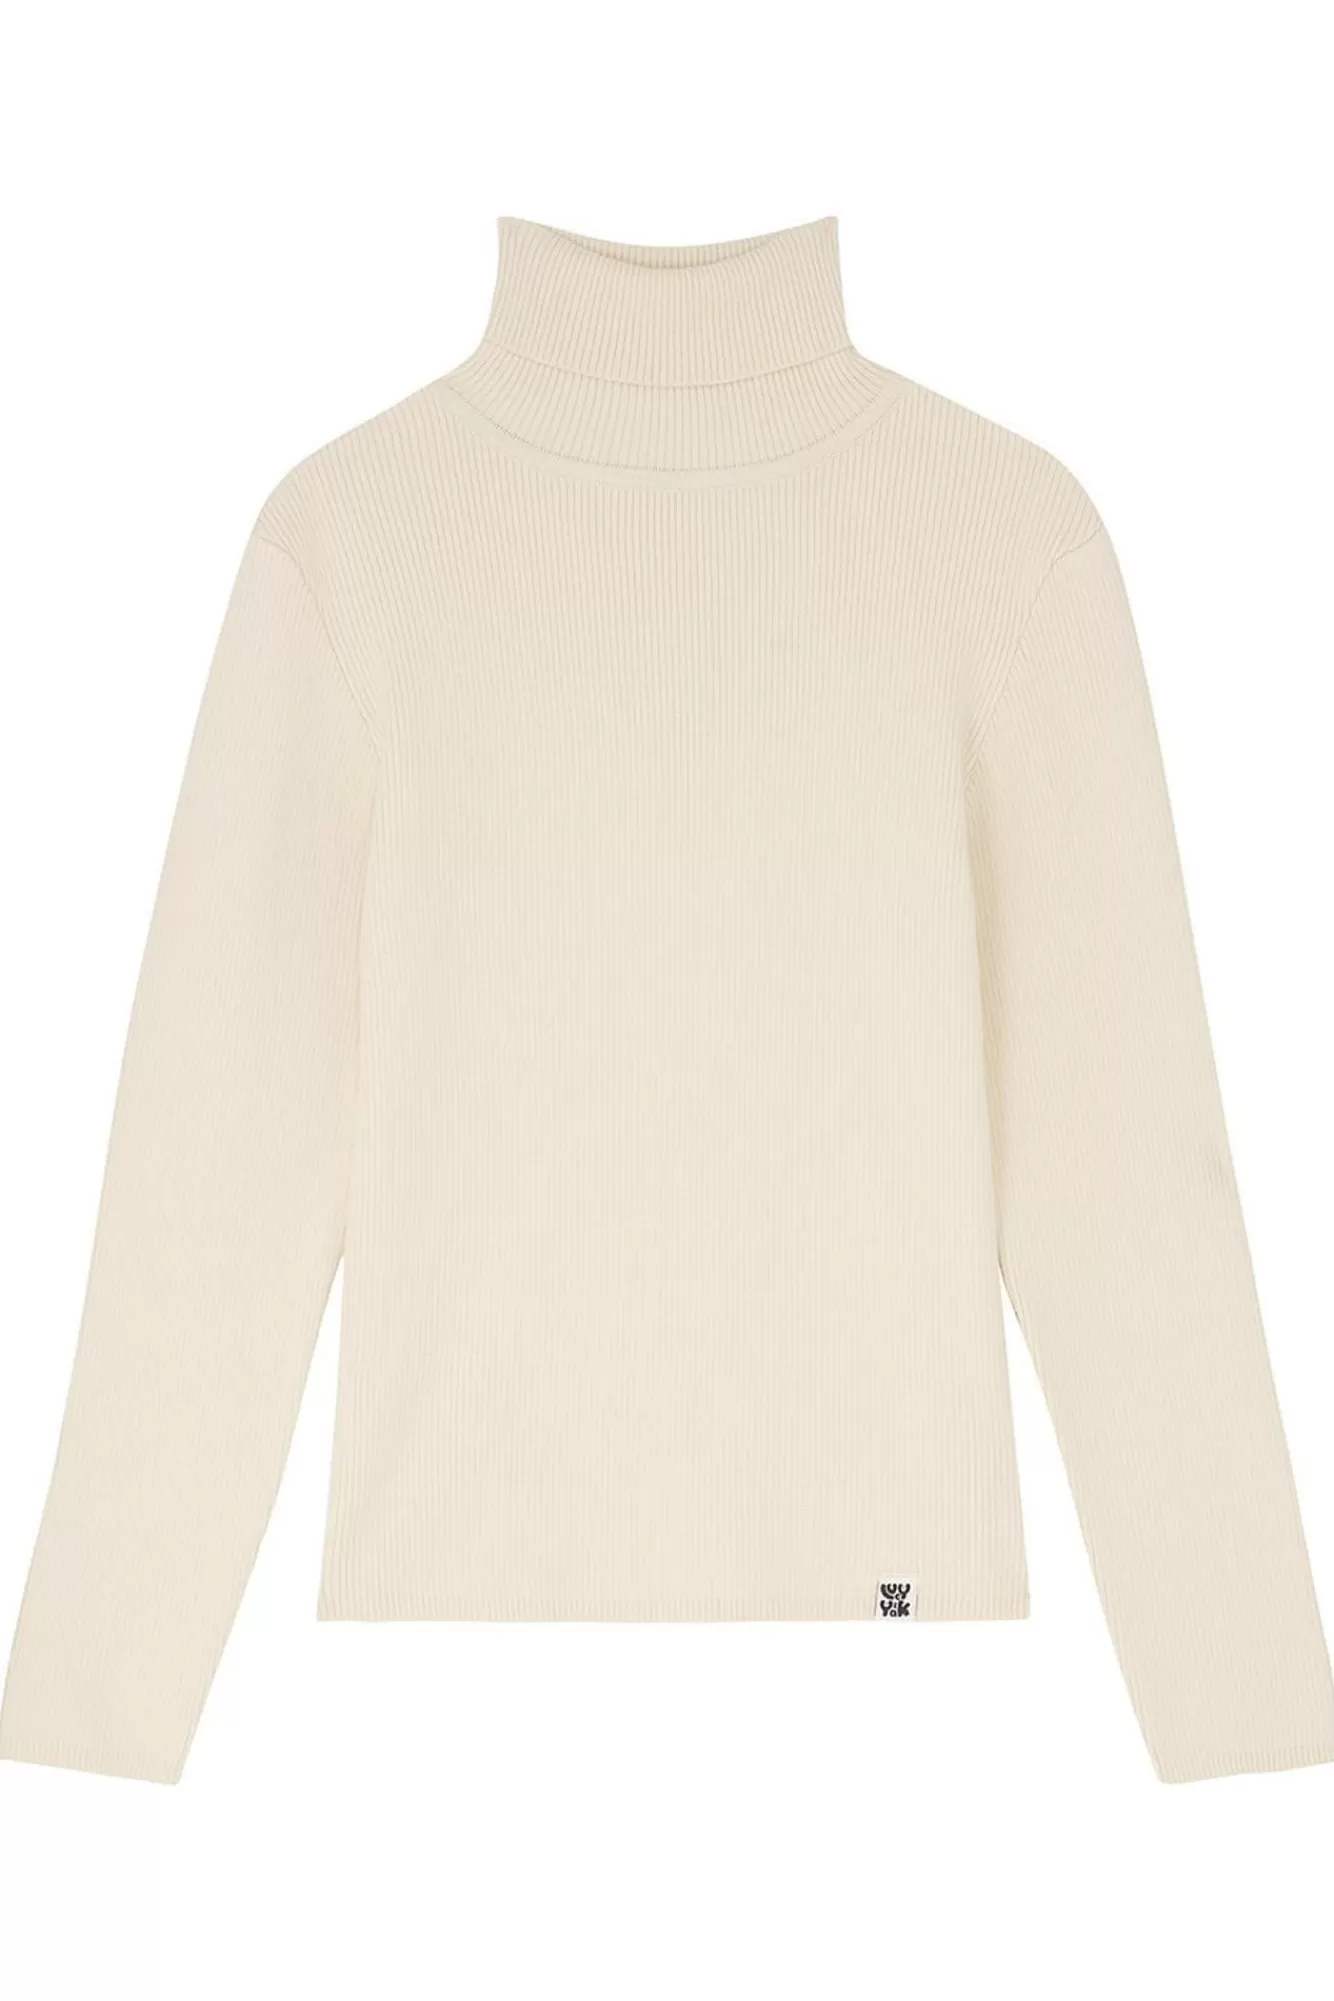 Aiden Roll Neck Top: Organic Cotton Knit - Pearl-Lucy & Yak Cheap